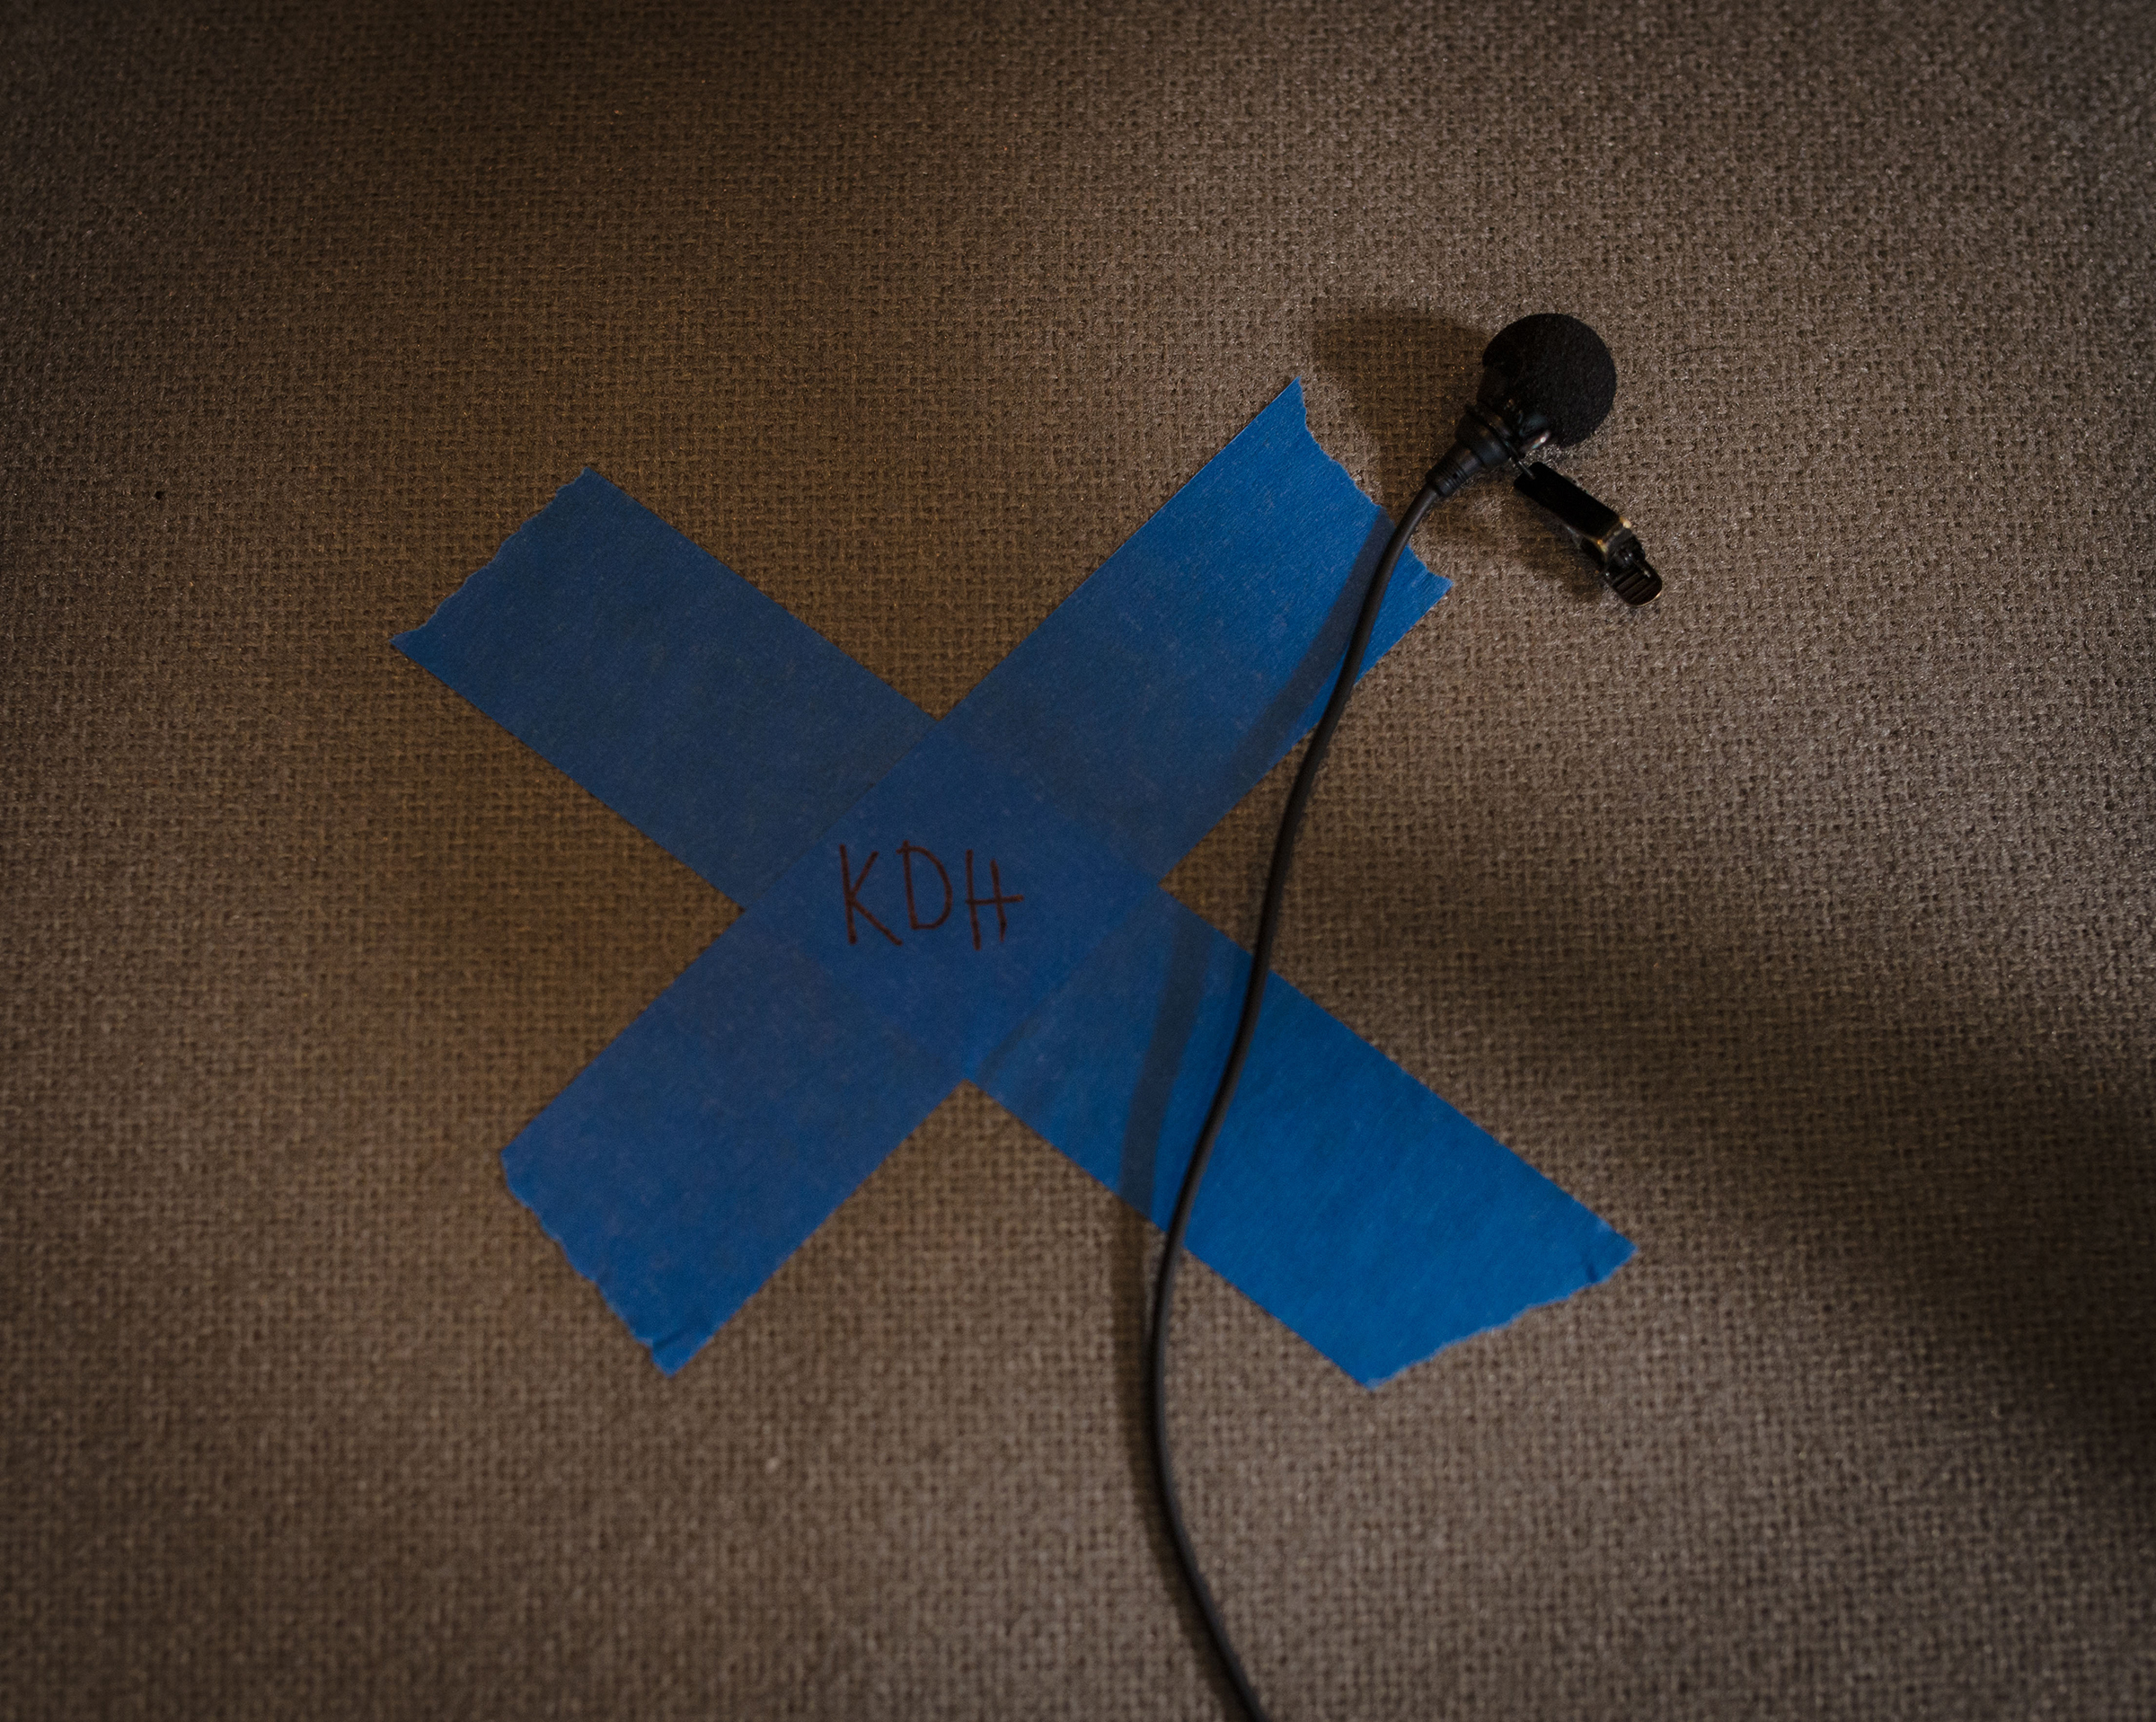 "X" marks the spot where Kamala Harris sits for a radio interview in Waterloo, Iowa, in September.